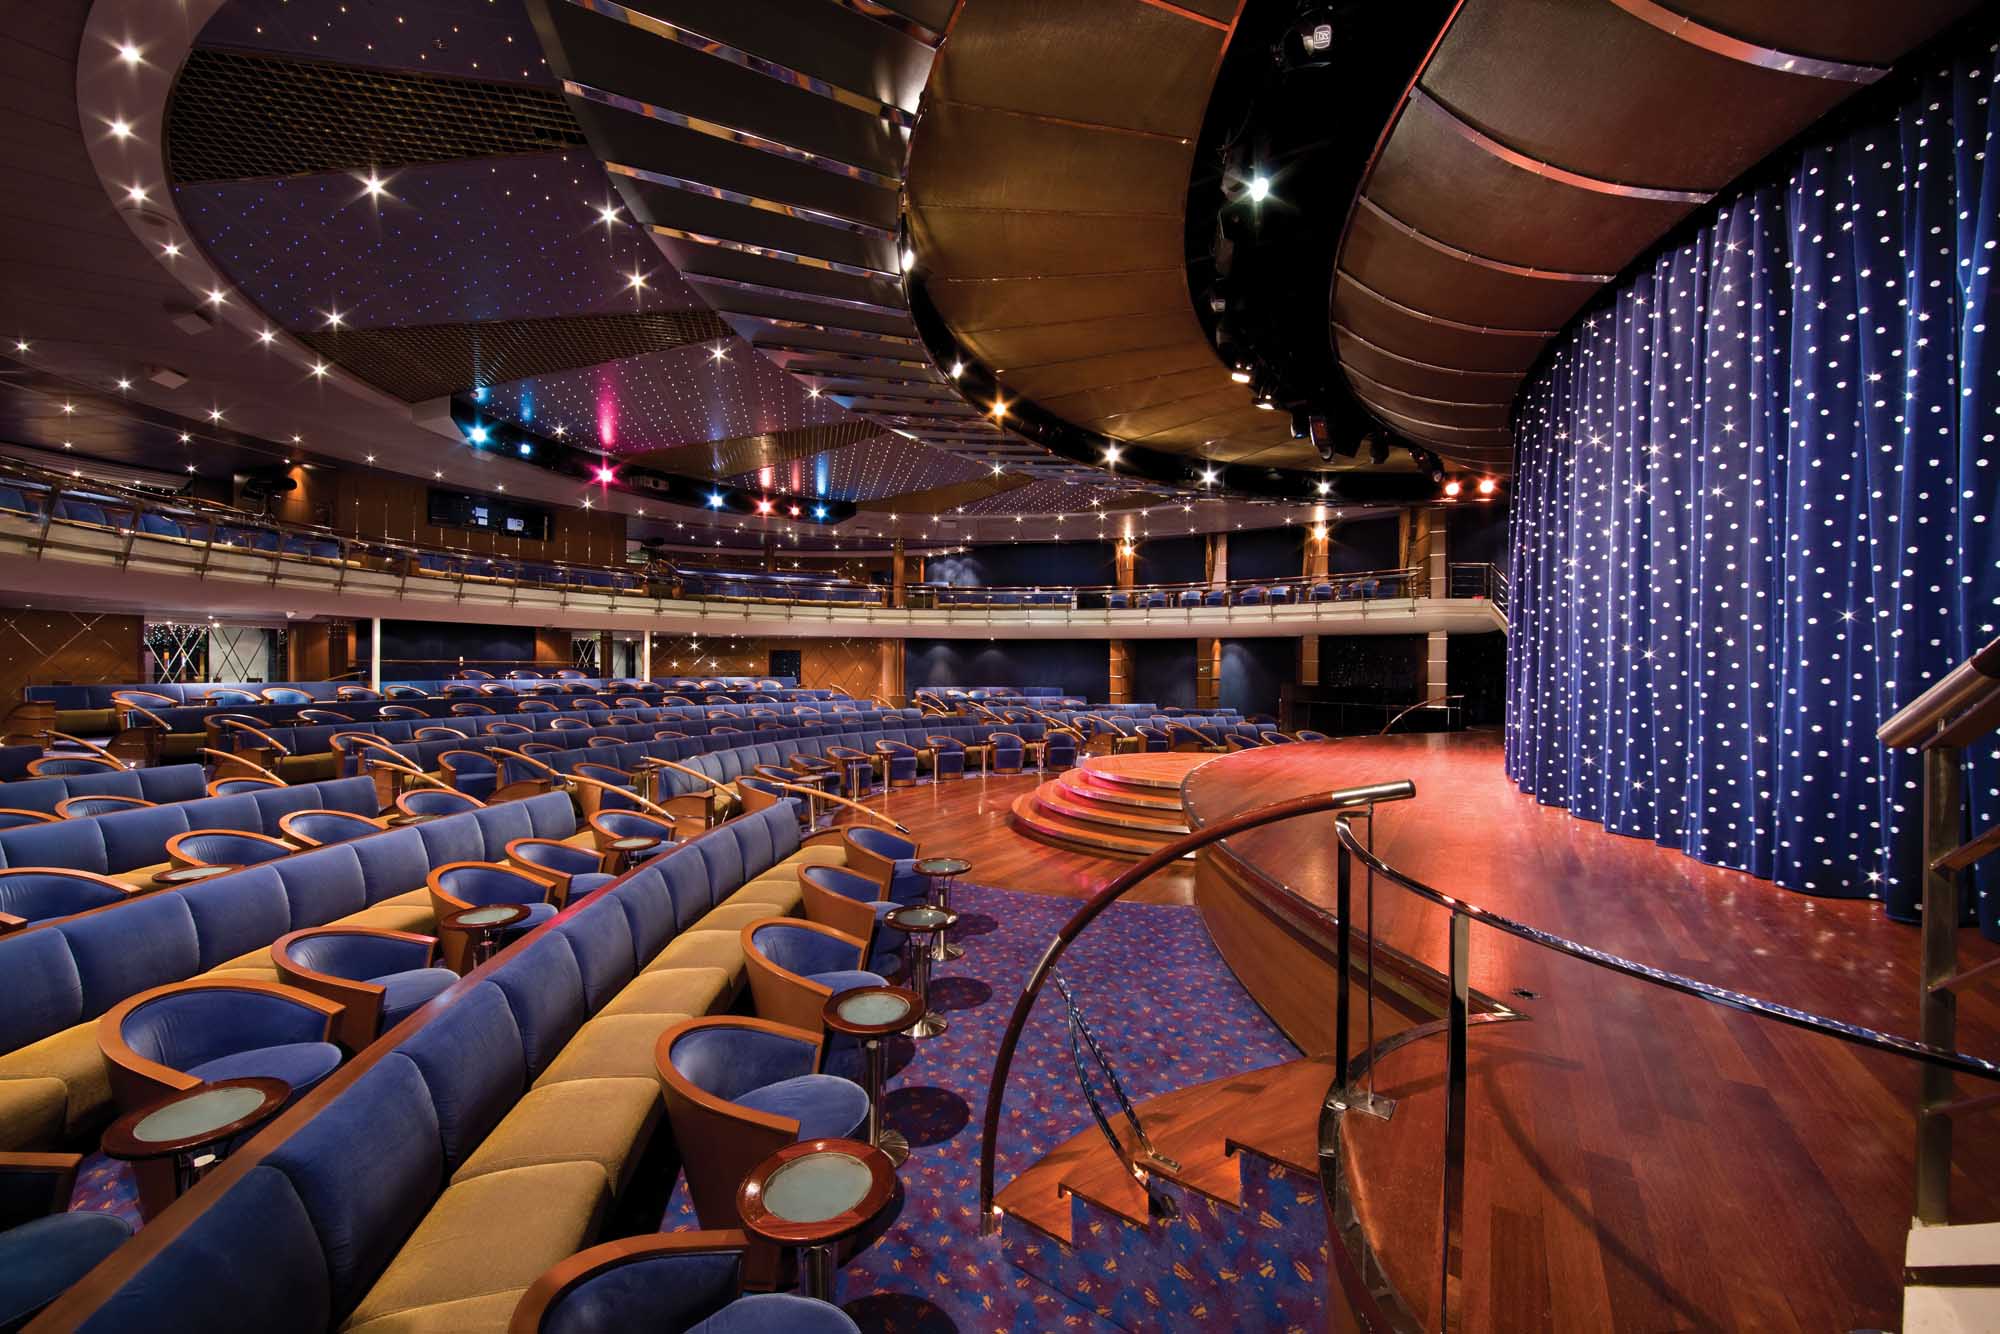 Catch an evening show in the Theater aboard Seven Seas Mariner during your voyage.